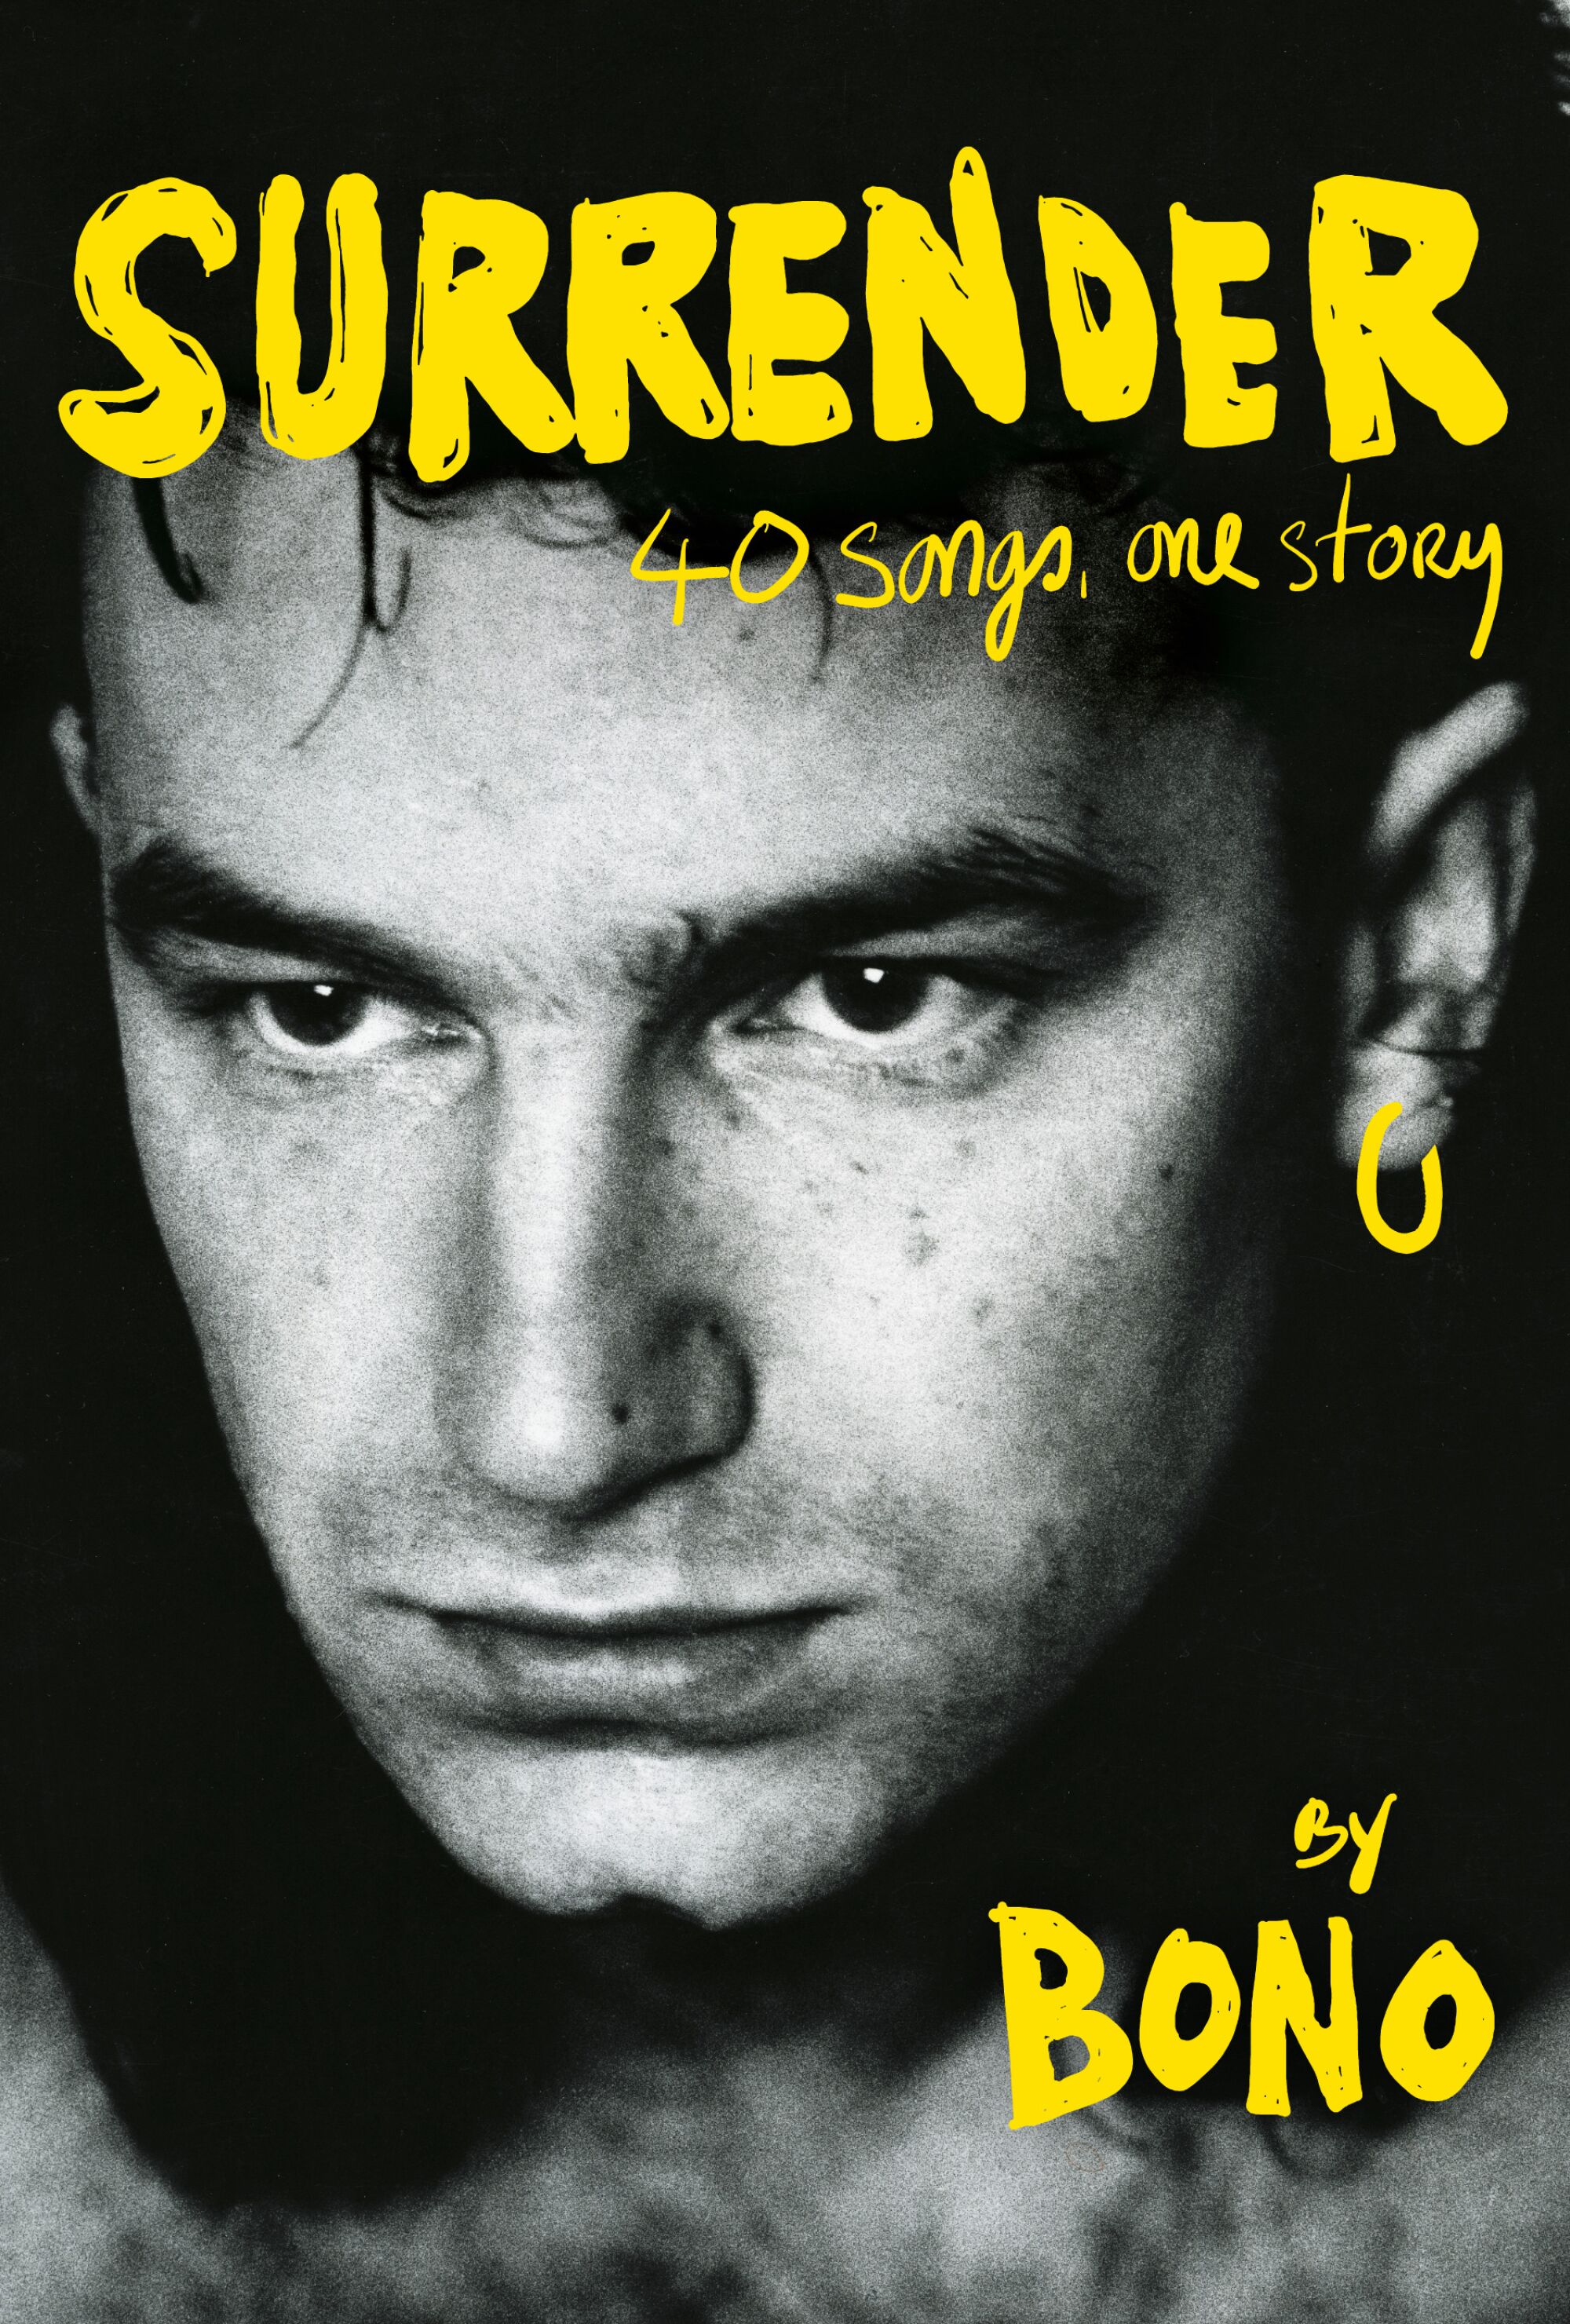 "Surrender: 40 Songs, One Story" by Bono